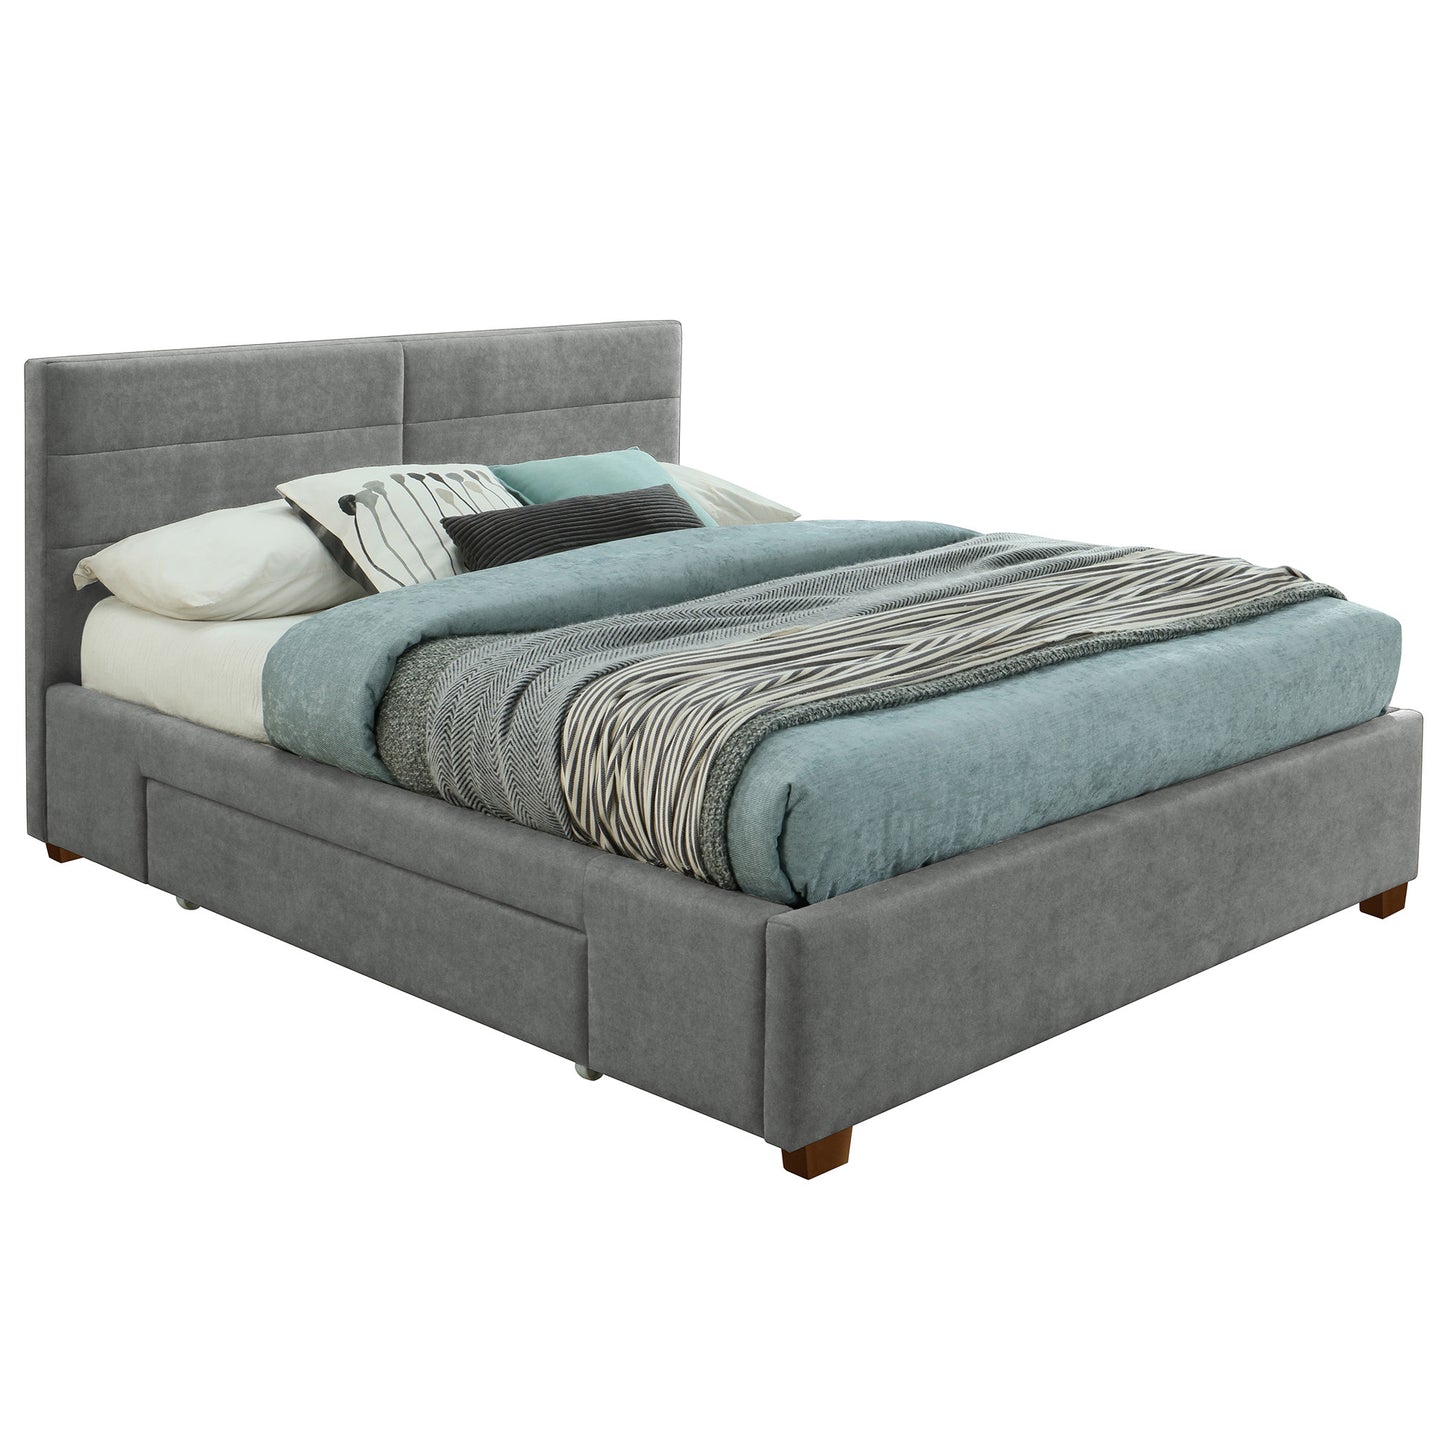 KING SIZE- (EMILIO LIGHT GREY)- FABRIC- BED FRAME- WITH DRAWERS ON 2 SIDES